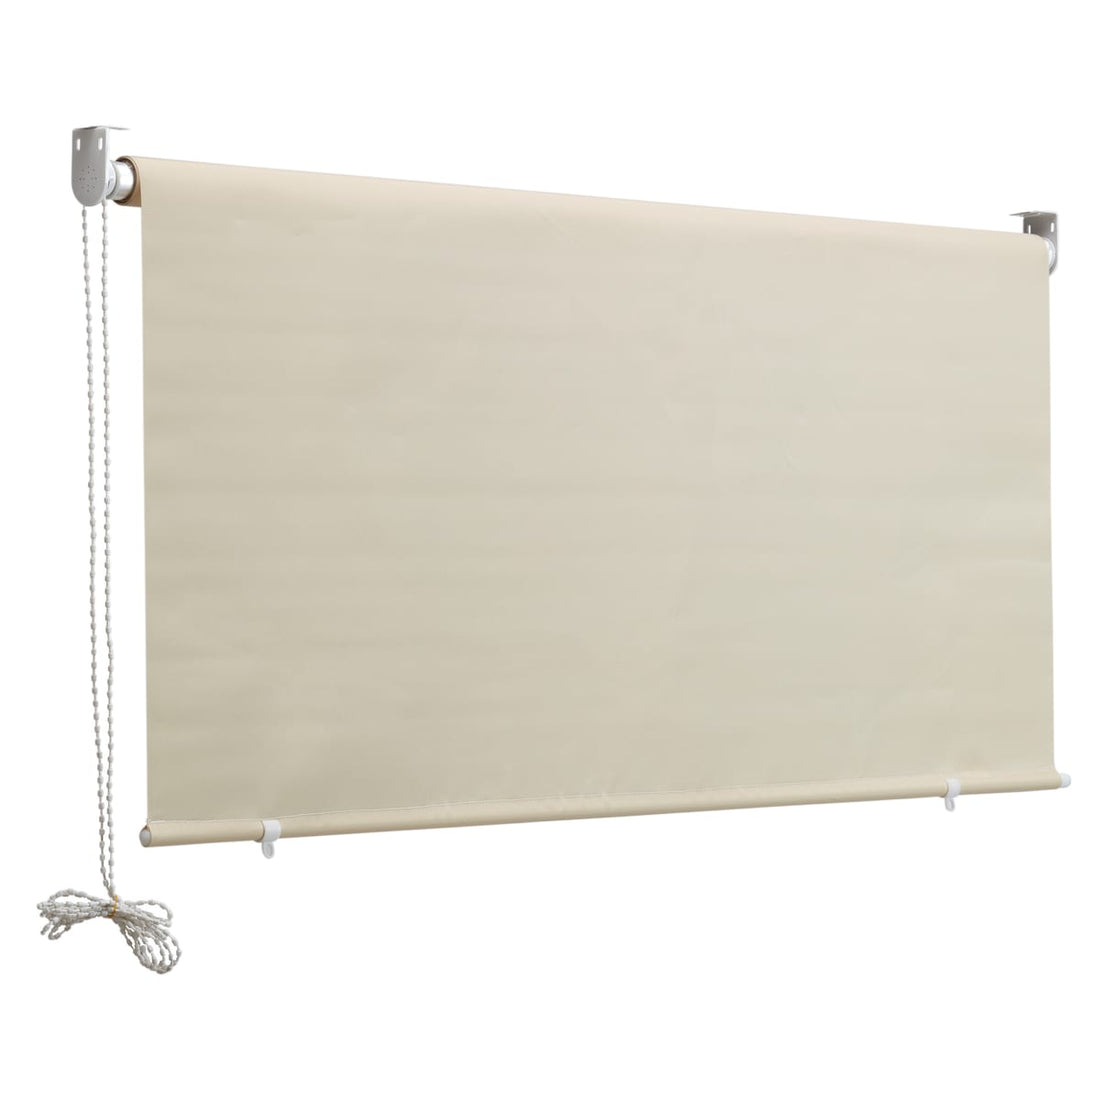 CAD AWNING W/ROLLER L200XH250 BEIGE